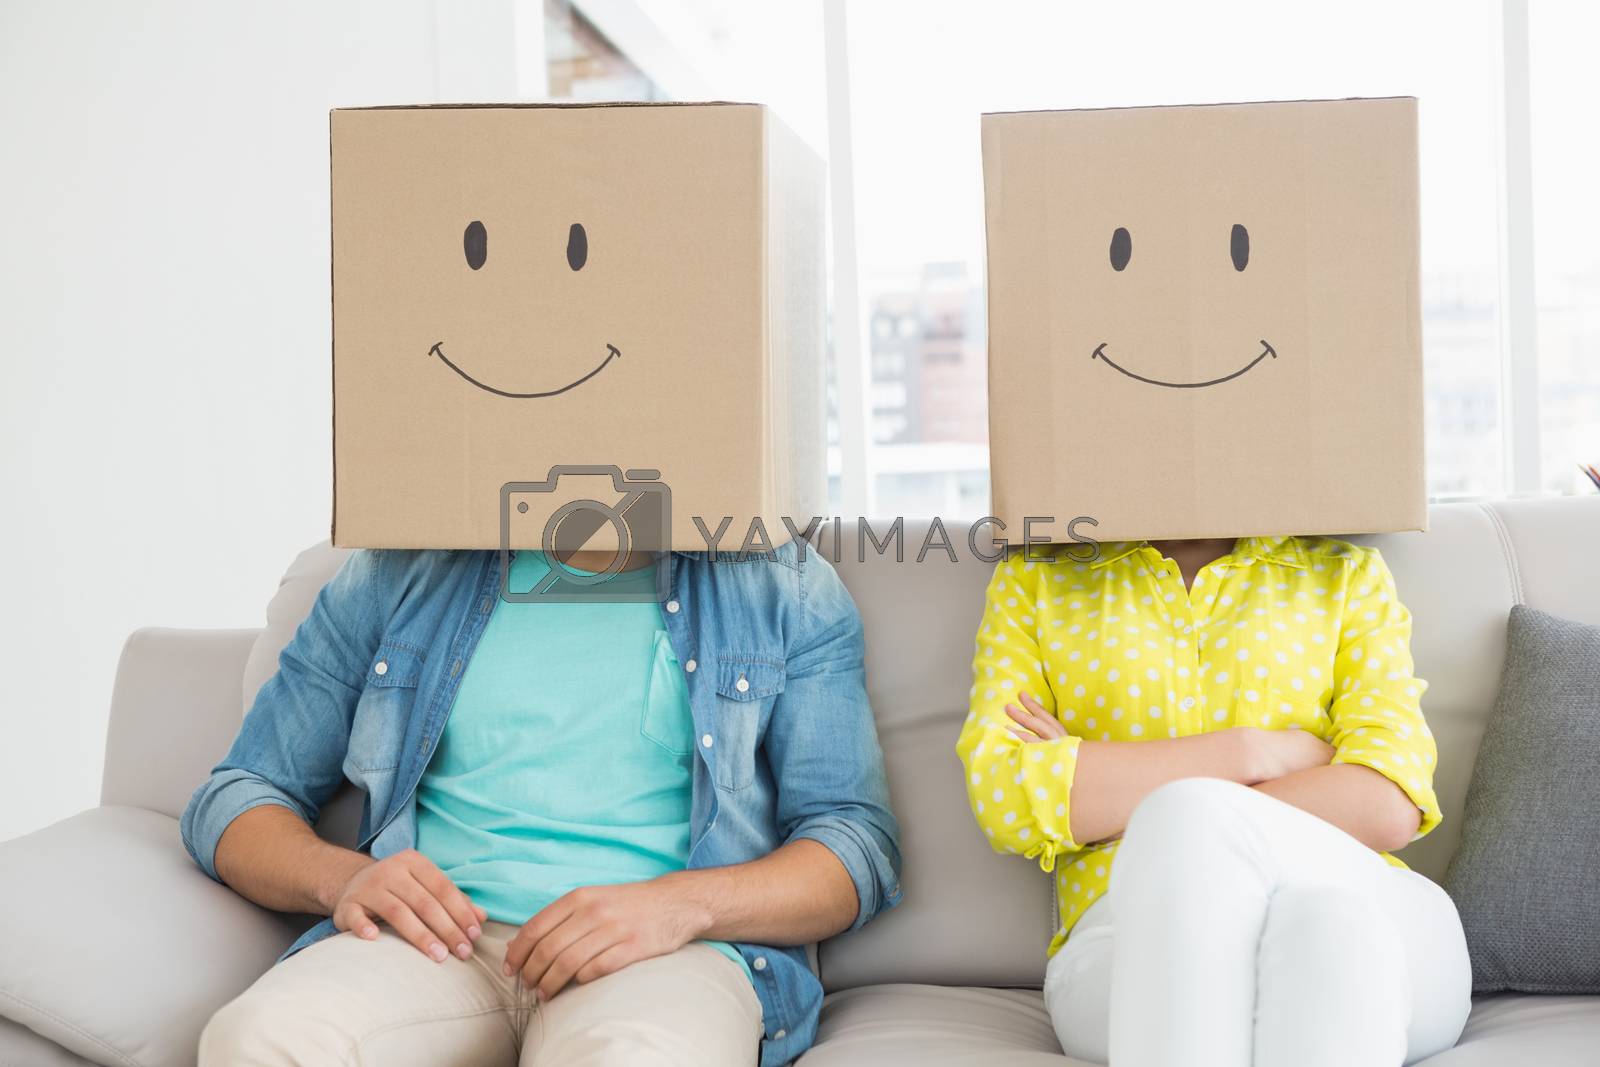 Royalty free image of Young creative team wearing boxes on head by Wavebreakmedia